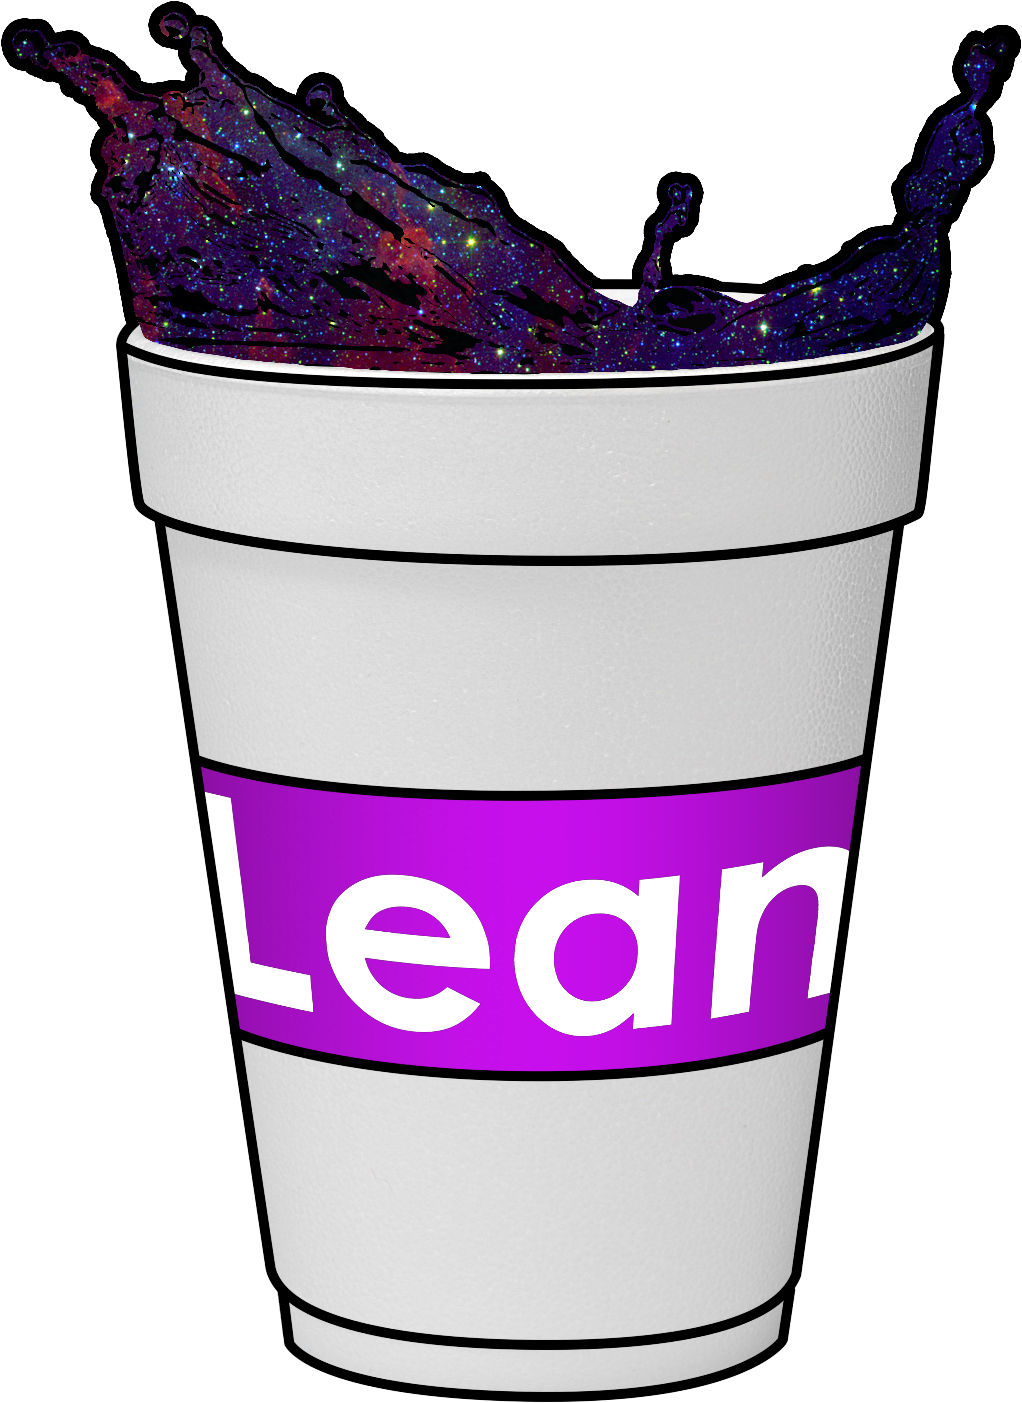 Lean Spilling Out Of Cup